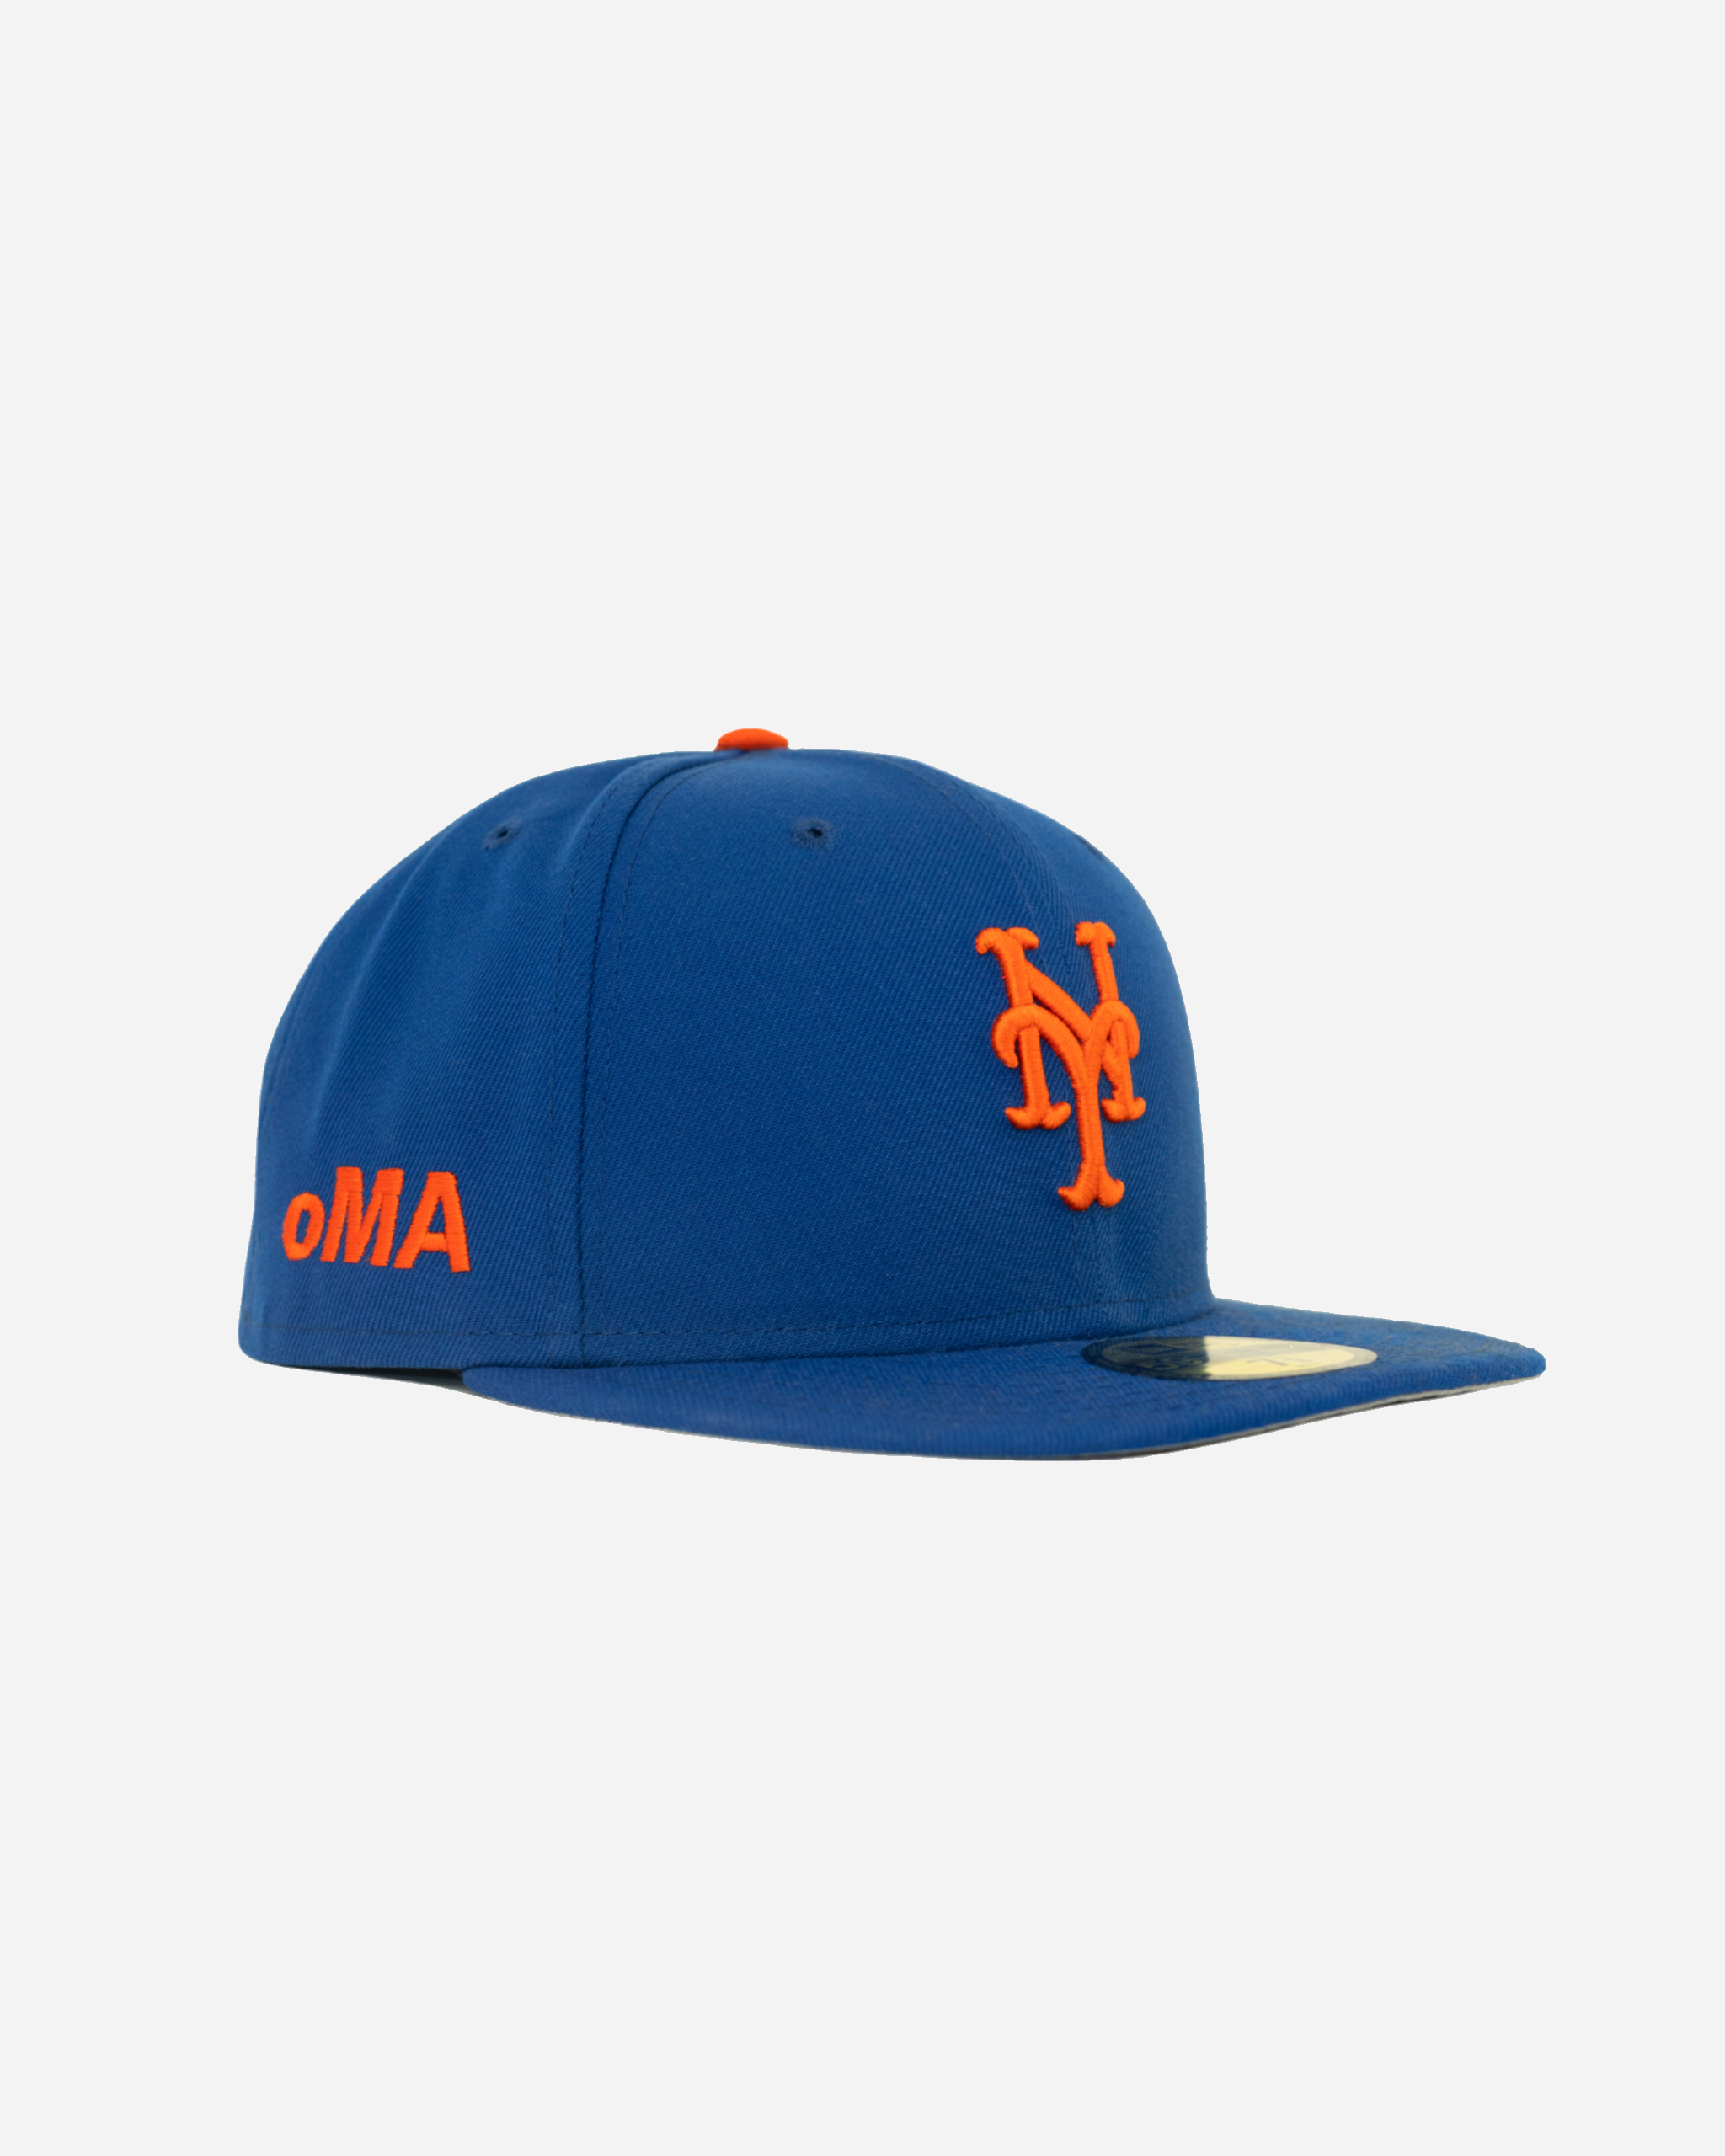 oMA NEW YORK METS FITTED HAT (SAMPLE)